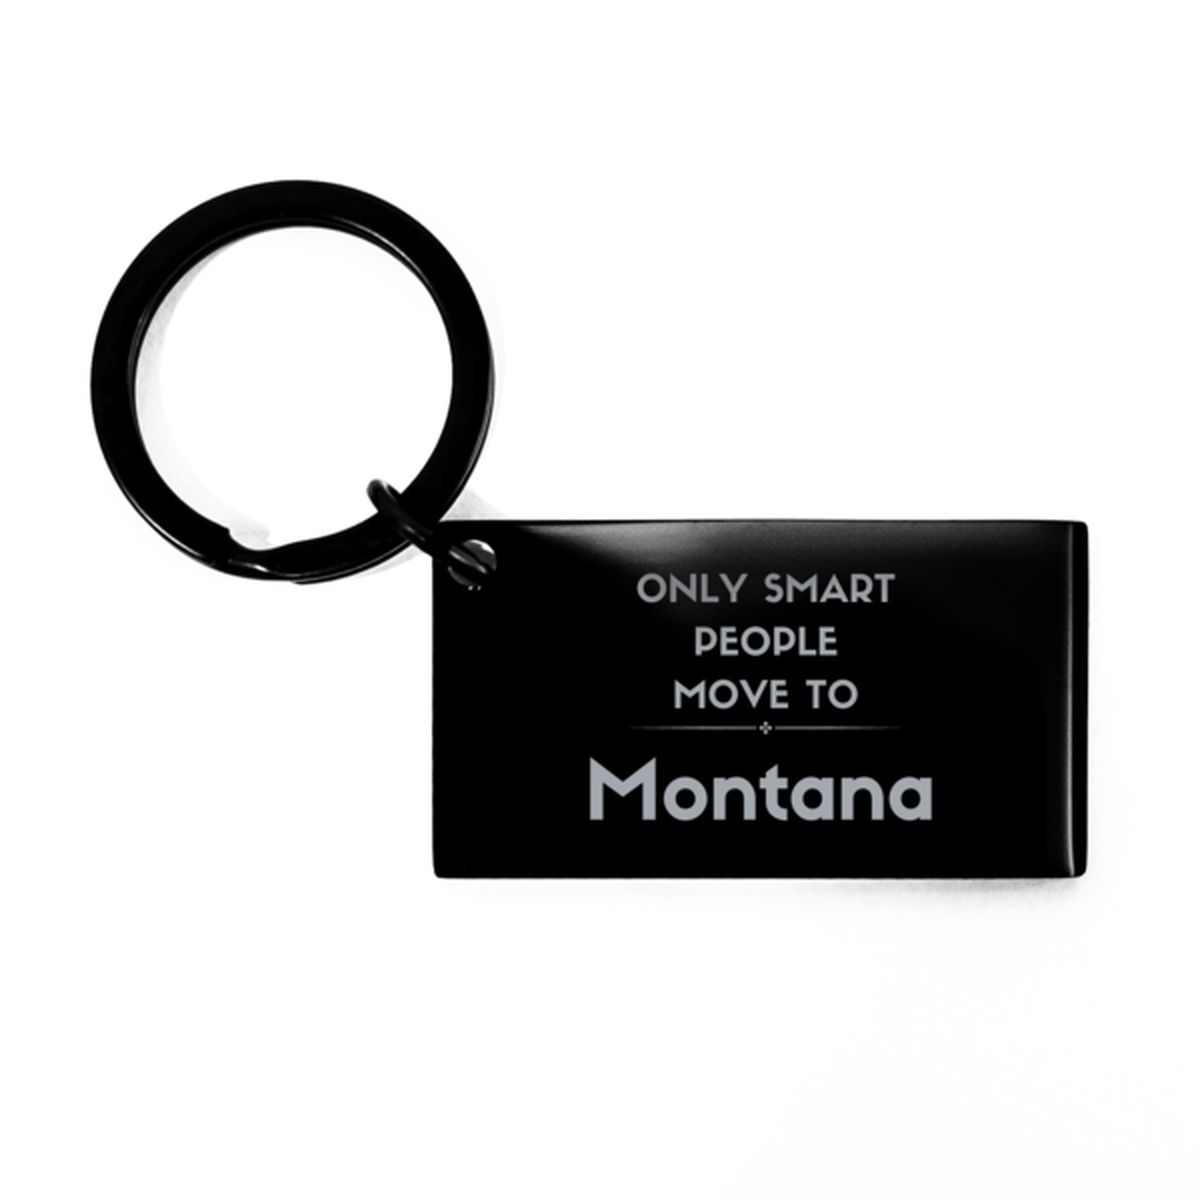 Only smart people move to Montana Keychain, Gag Gifts For Montana, Move to Montana Gifts for Friends Coworker Funny Saying Quote